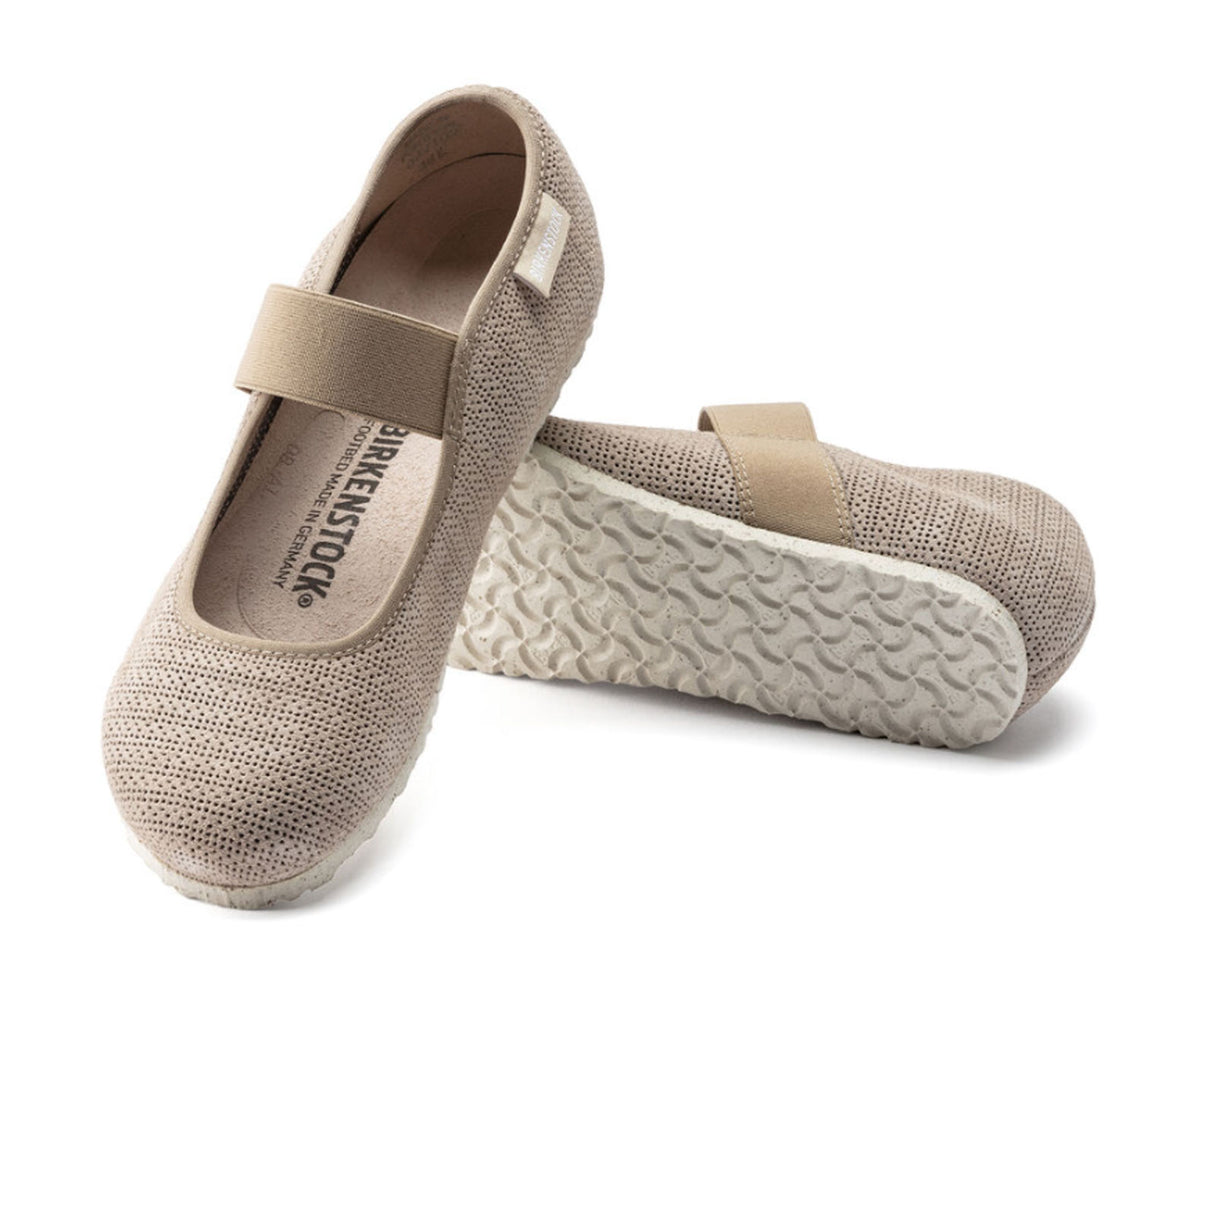 Birkenstock Tess Embossed Leather Mary Jane (Women) - Sand Dress-Casual - Mary Janes - The Heel Shoe Fitters